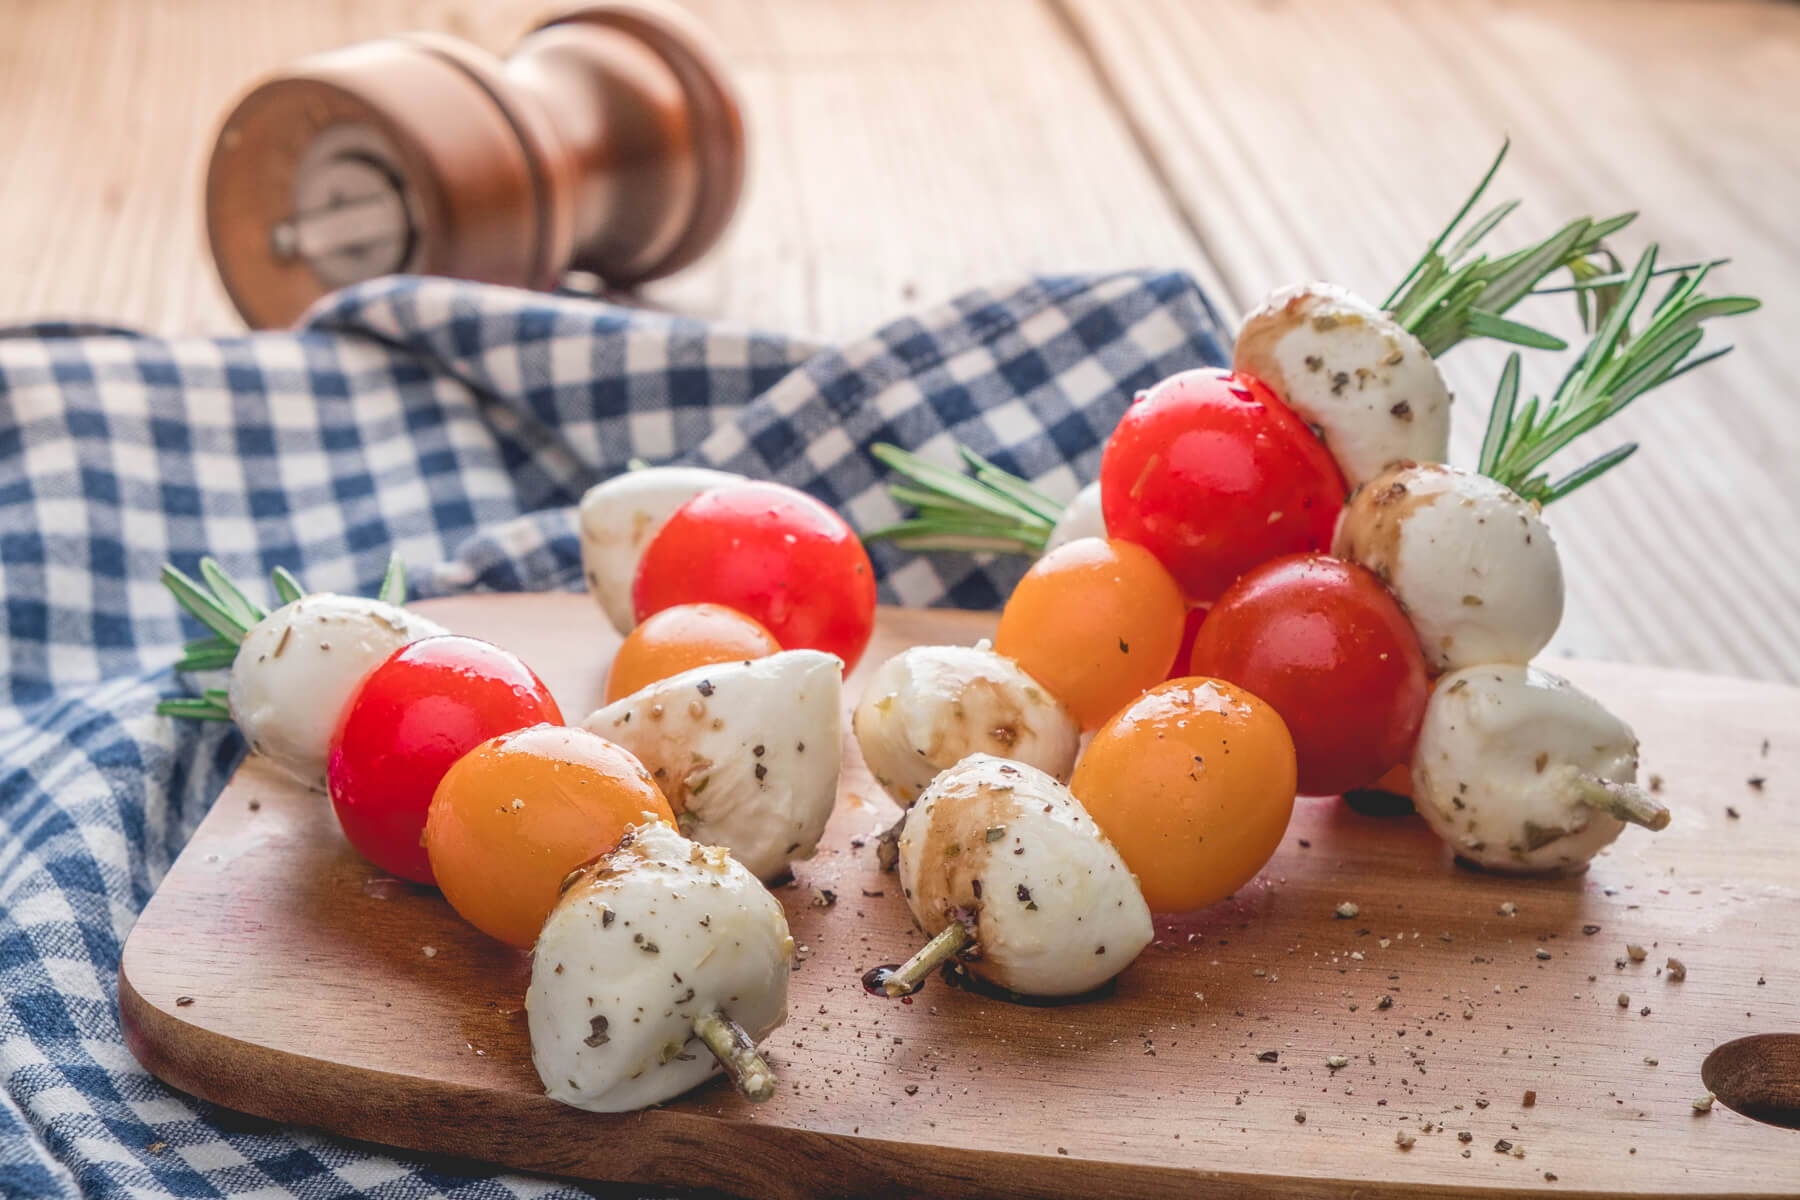 A healthy party hit that tastes as good as it looks! These Cherry Tomato skewers are a quick and easy way to spruce up any get together.